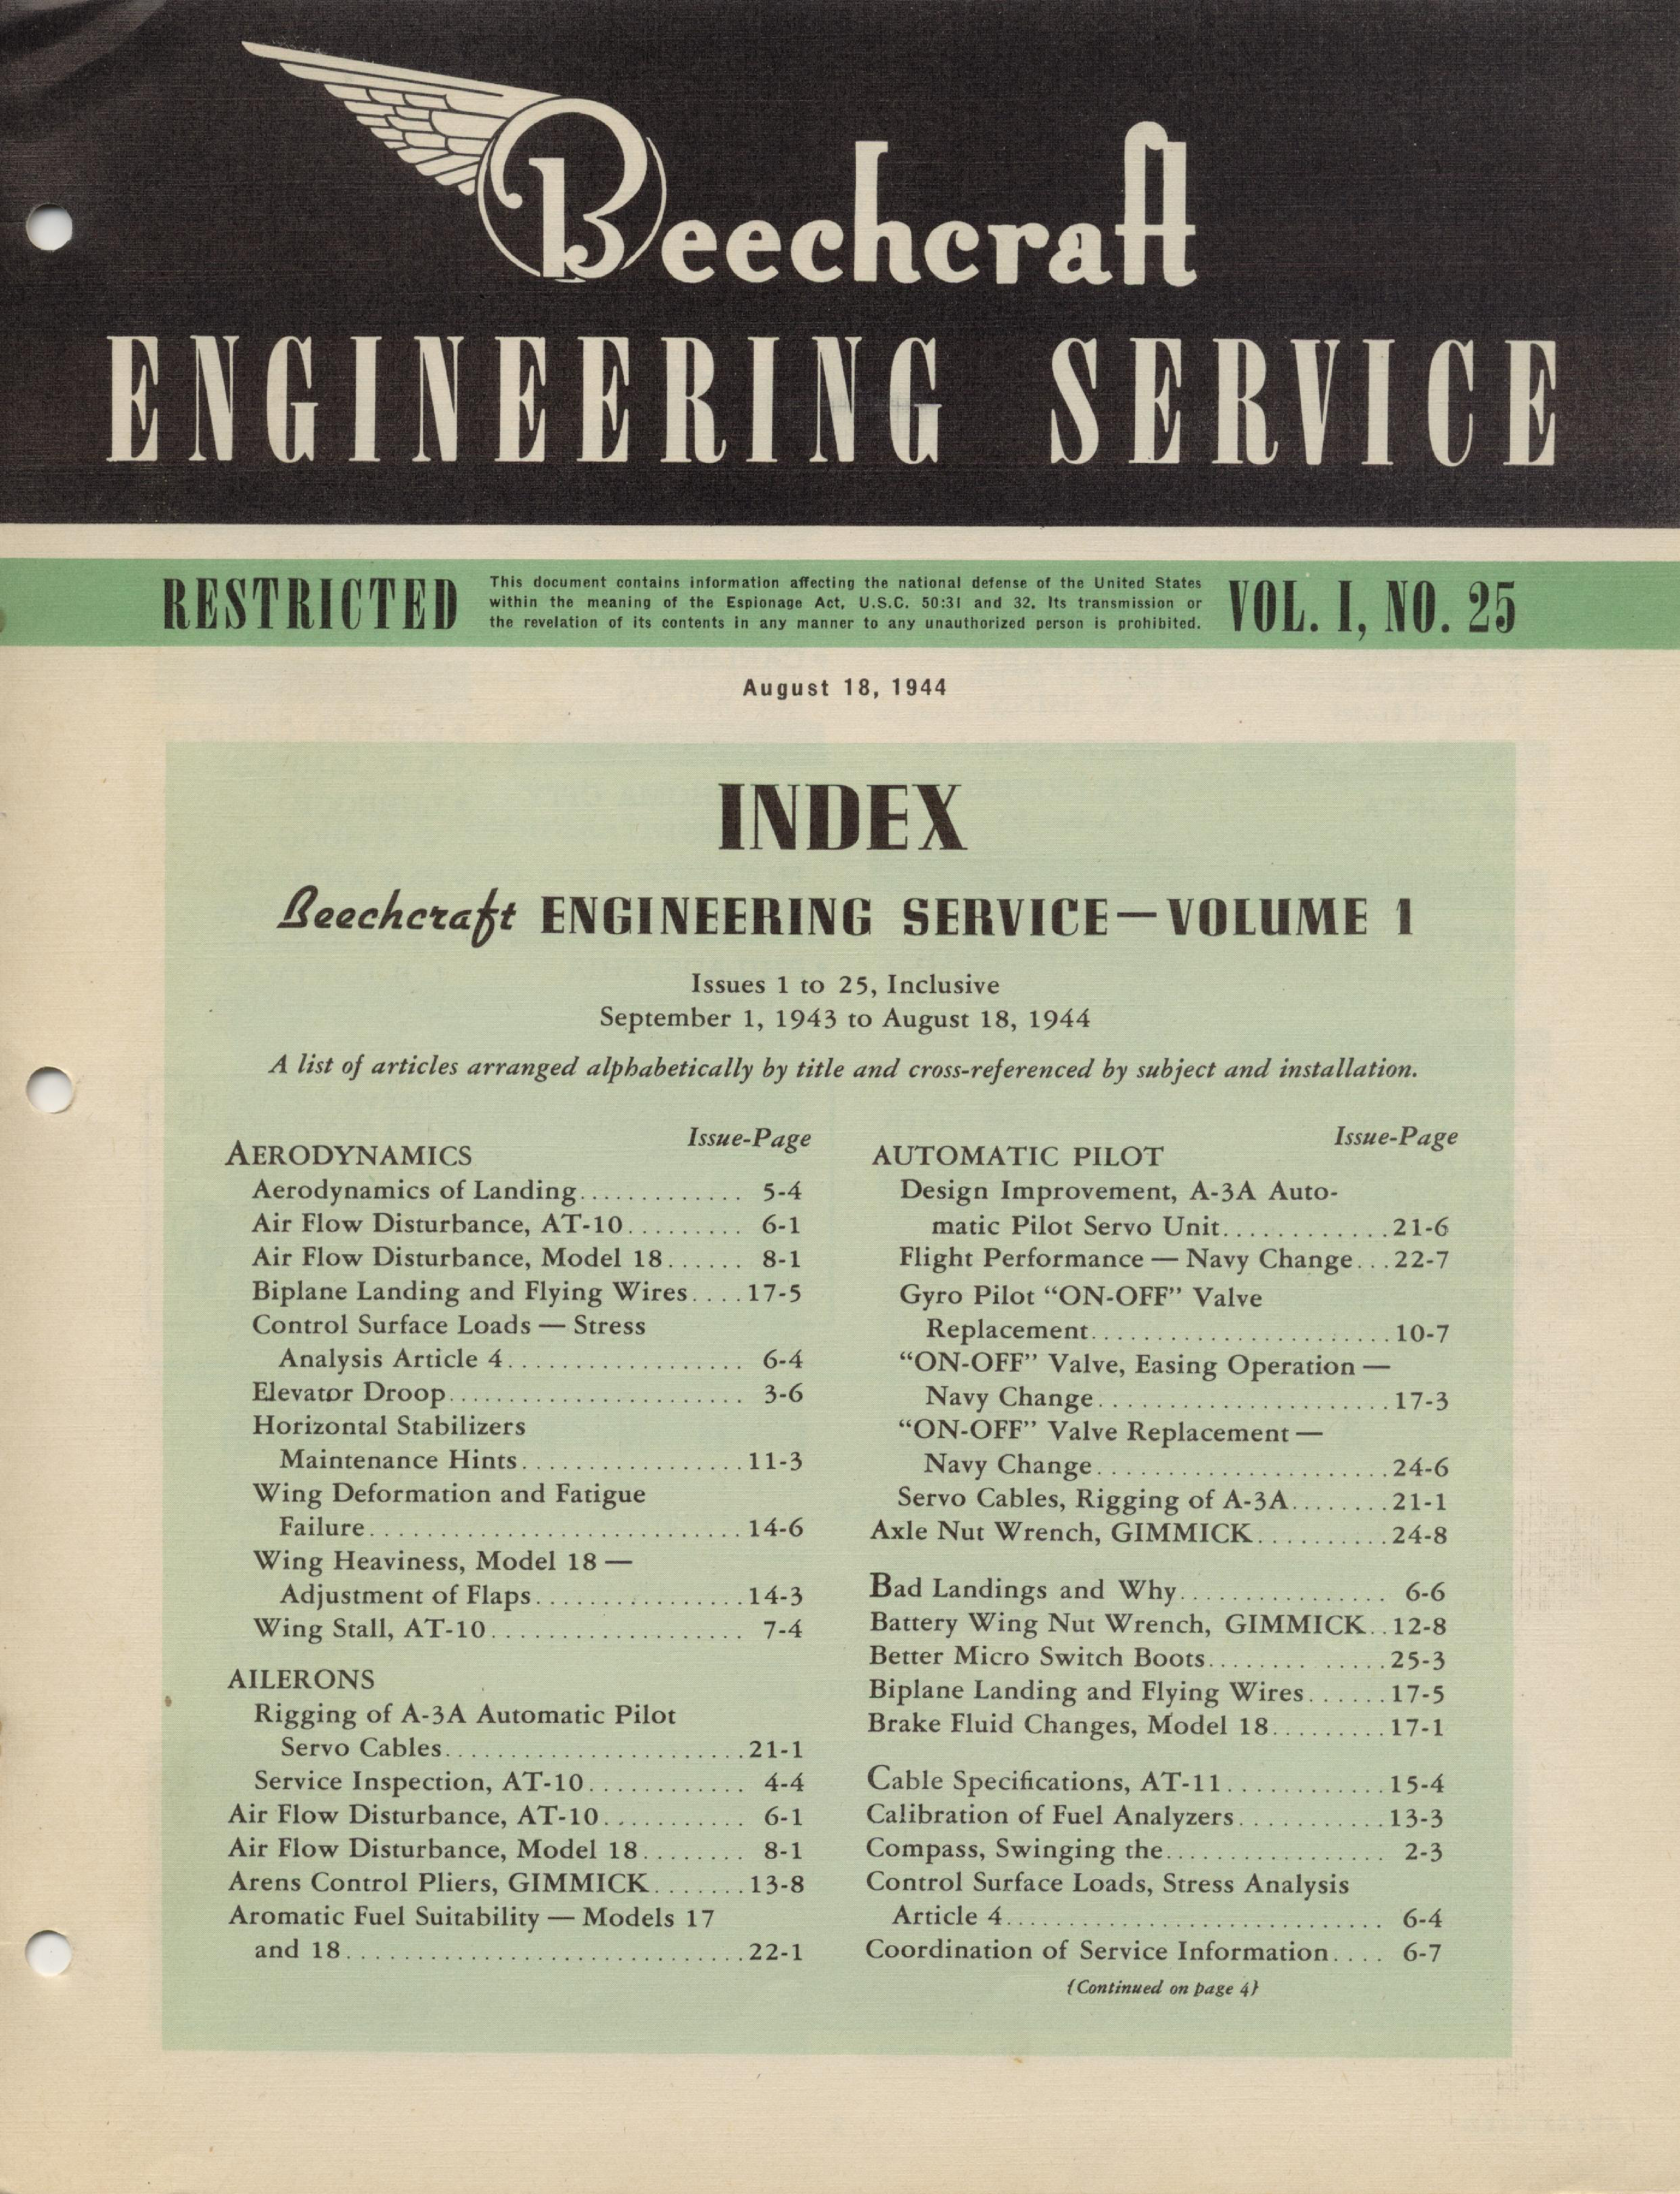 Sample page 1 from AirCorps Library document: Vol. I, No. 25 - Beechcraft Engineering Service